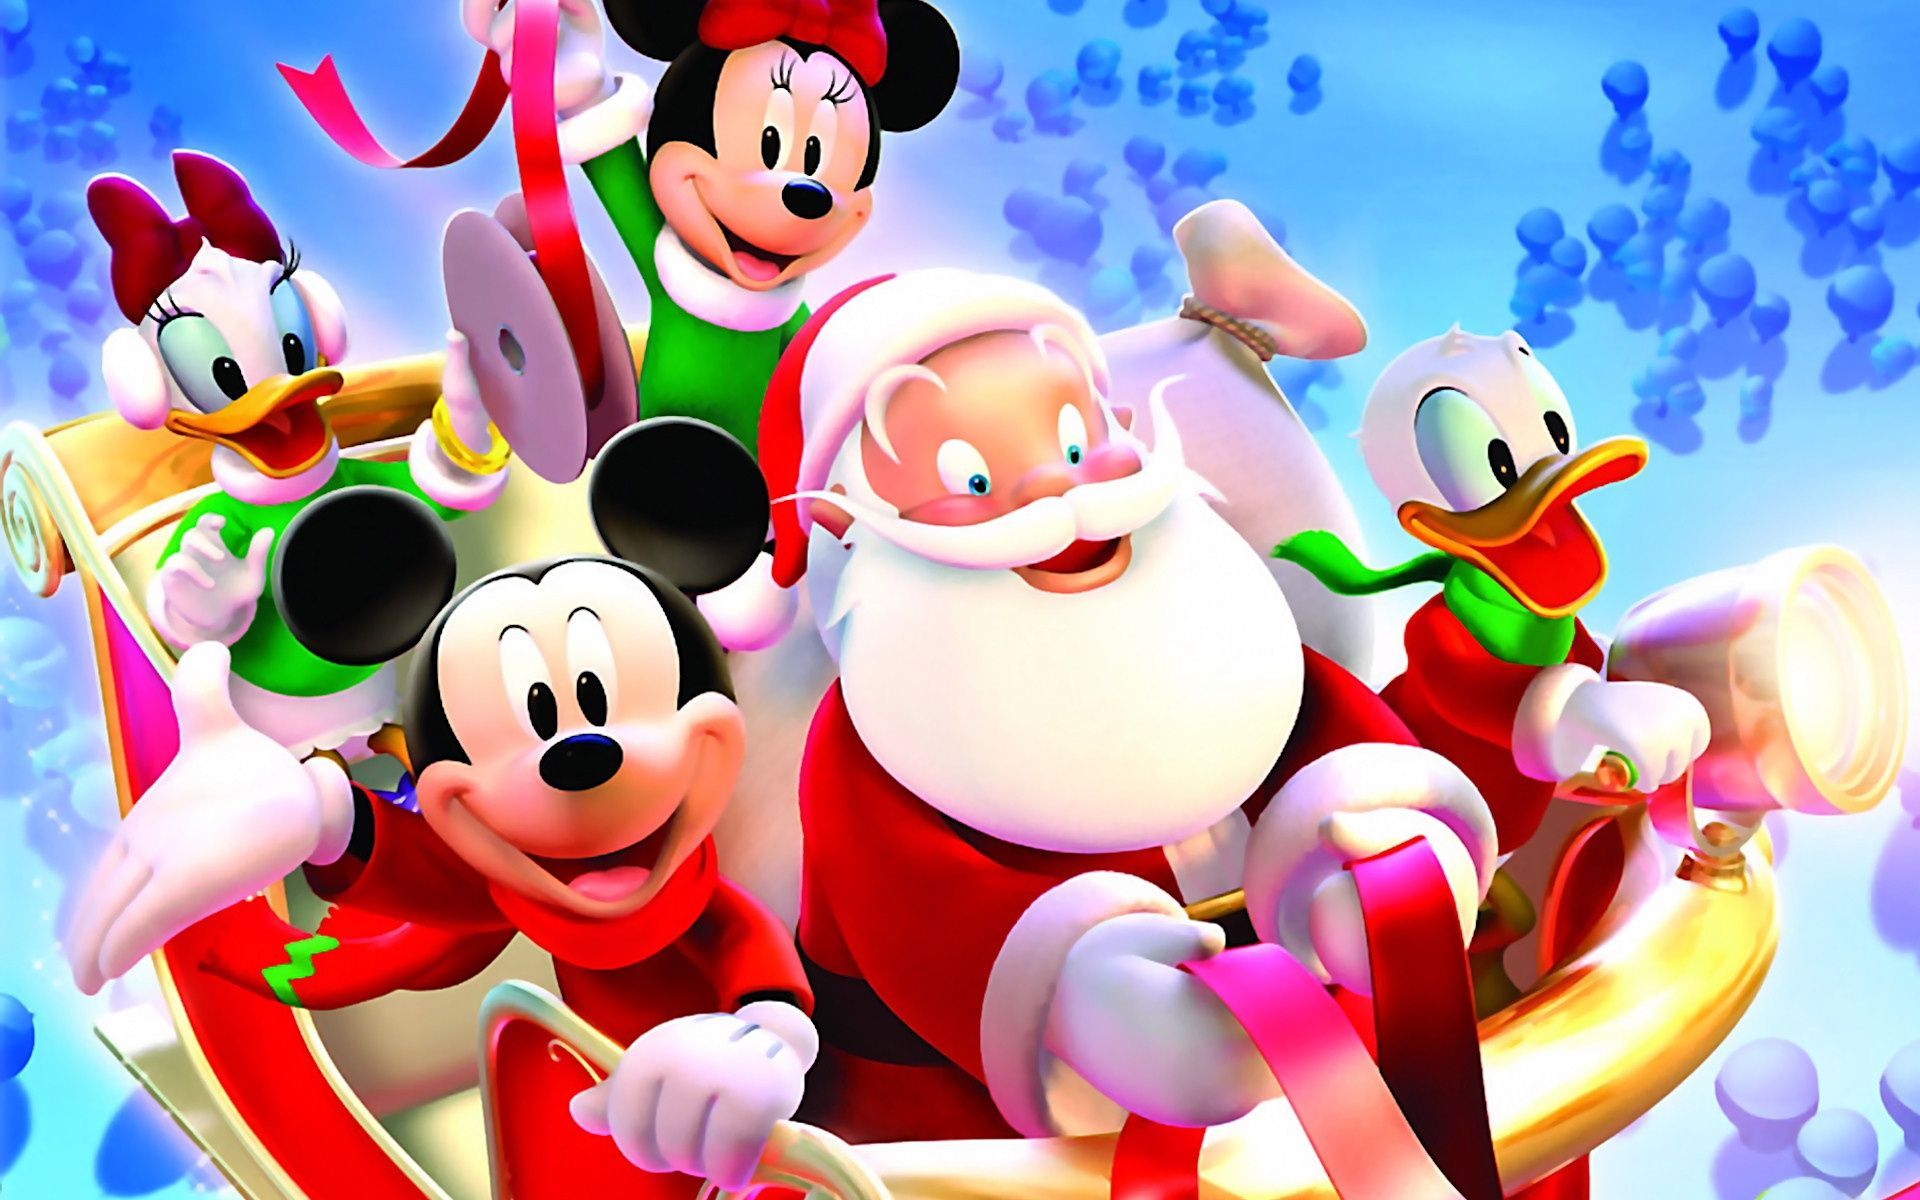 Disney Christmas Wallpapers Hd Mickey Mouse With Santa Claus :  